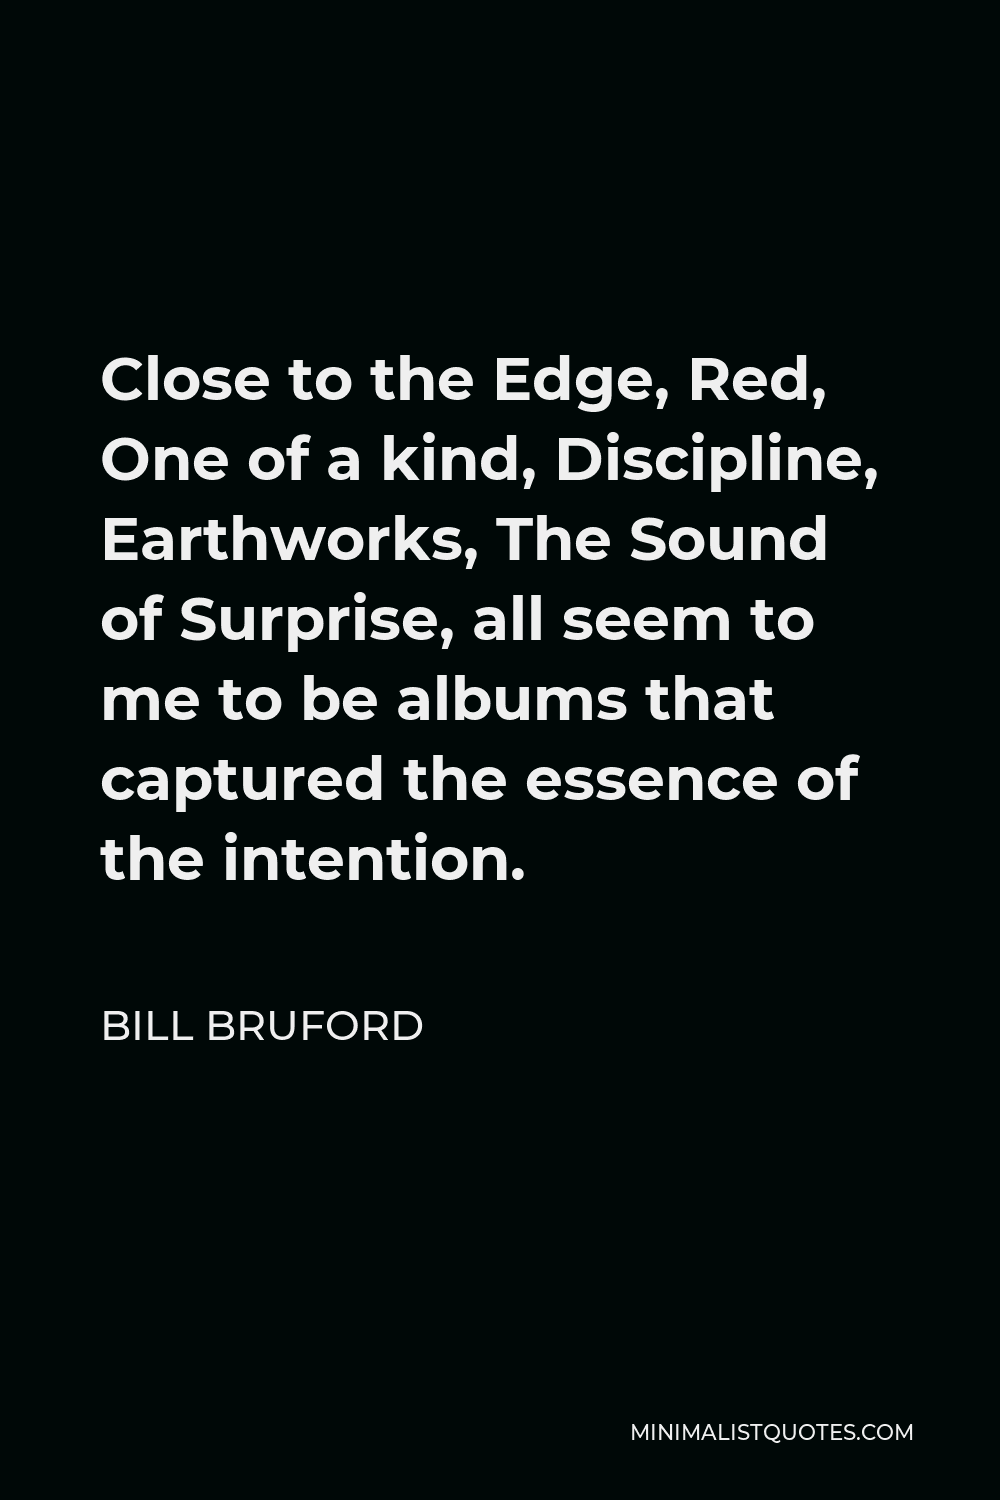 Bill Bruford Quote - Close to the Edge, Red, One of a kind, Discipline, Earthworks, The Sound of Surprise, all seem to me to be albums that captured the essence of the intention.